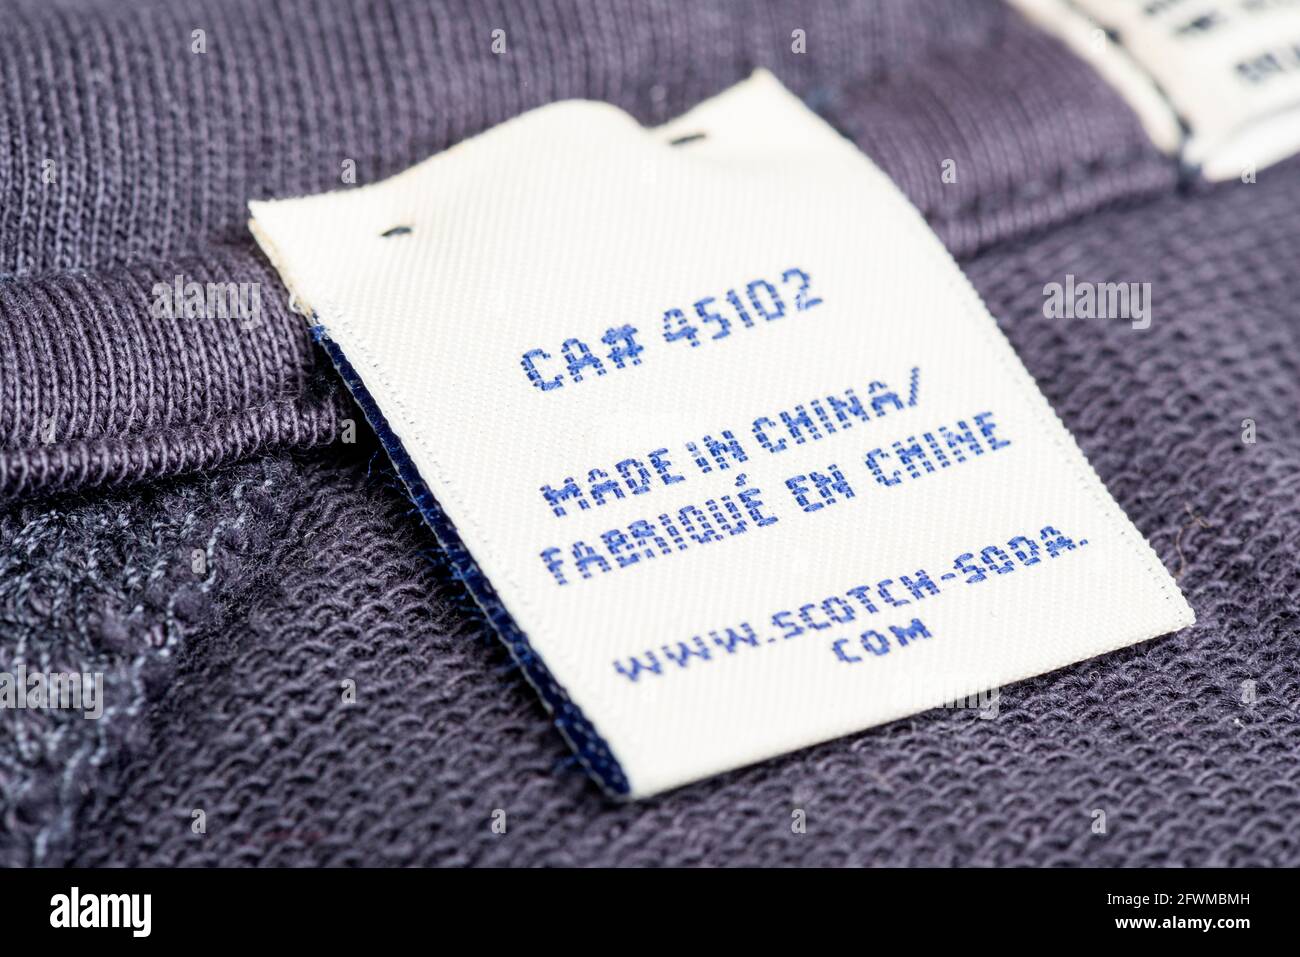 Made In China Labels On Zara Basic Garments European Union Member States Are Gearing Up To Press Brussels For Emergency Measures Leading To A Fast Track Application Of Limits On Booming Textile Imports